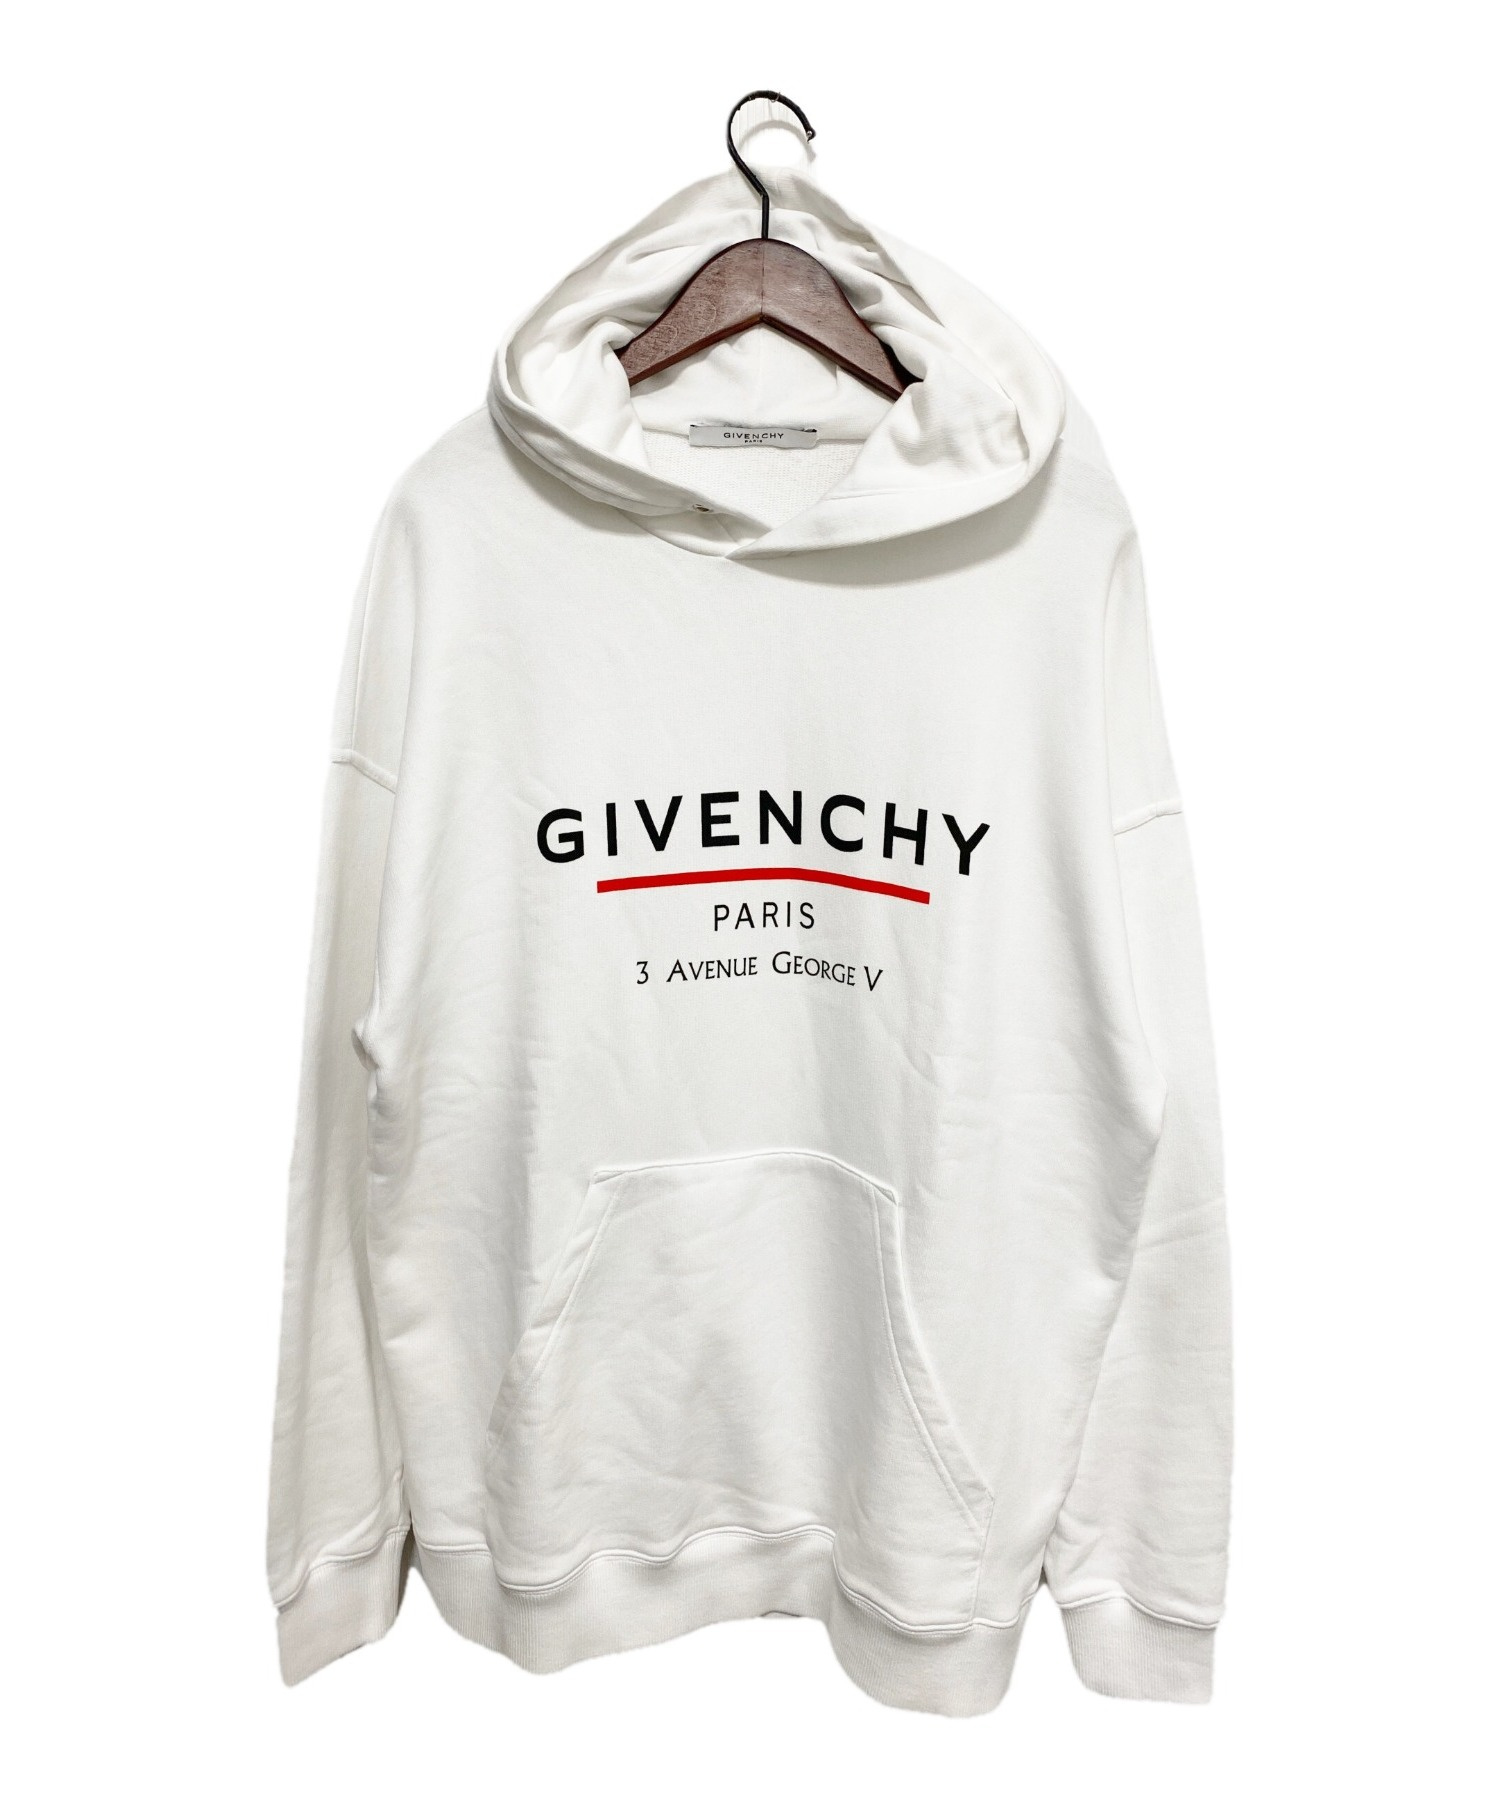 GIVENCHY 19AW ロゴ入りパーカーGIVENCHYパーカー